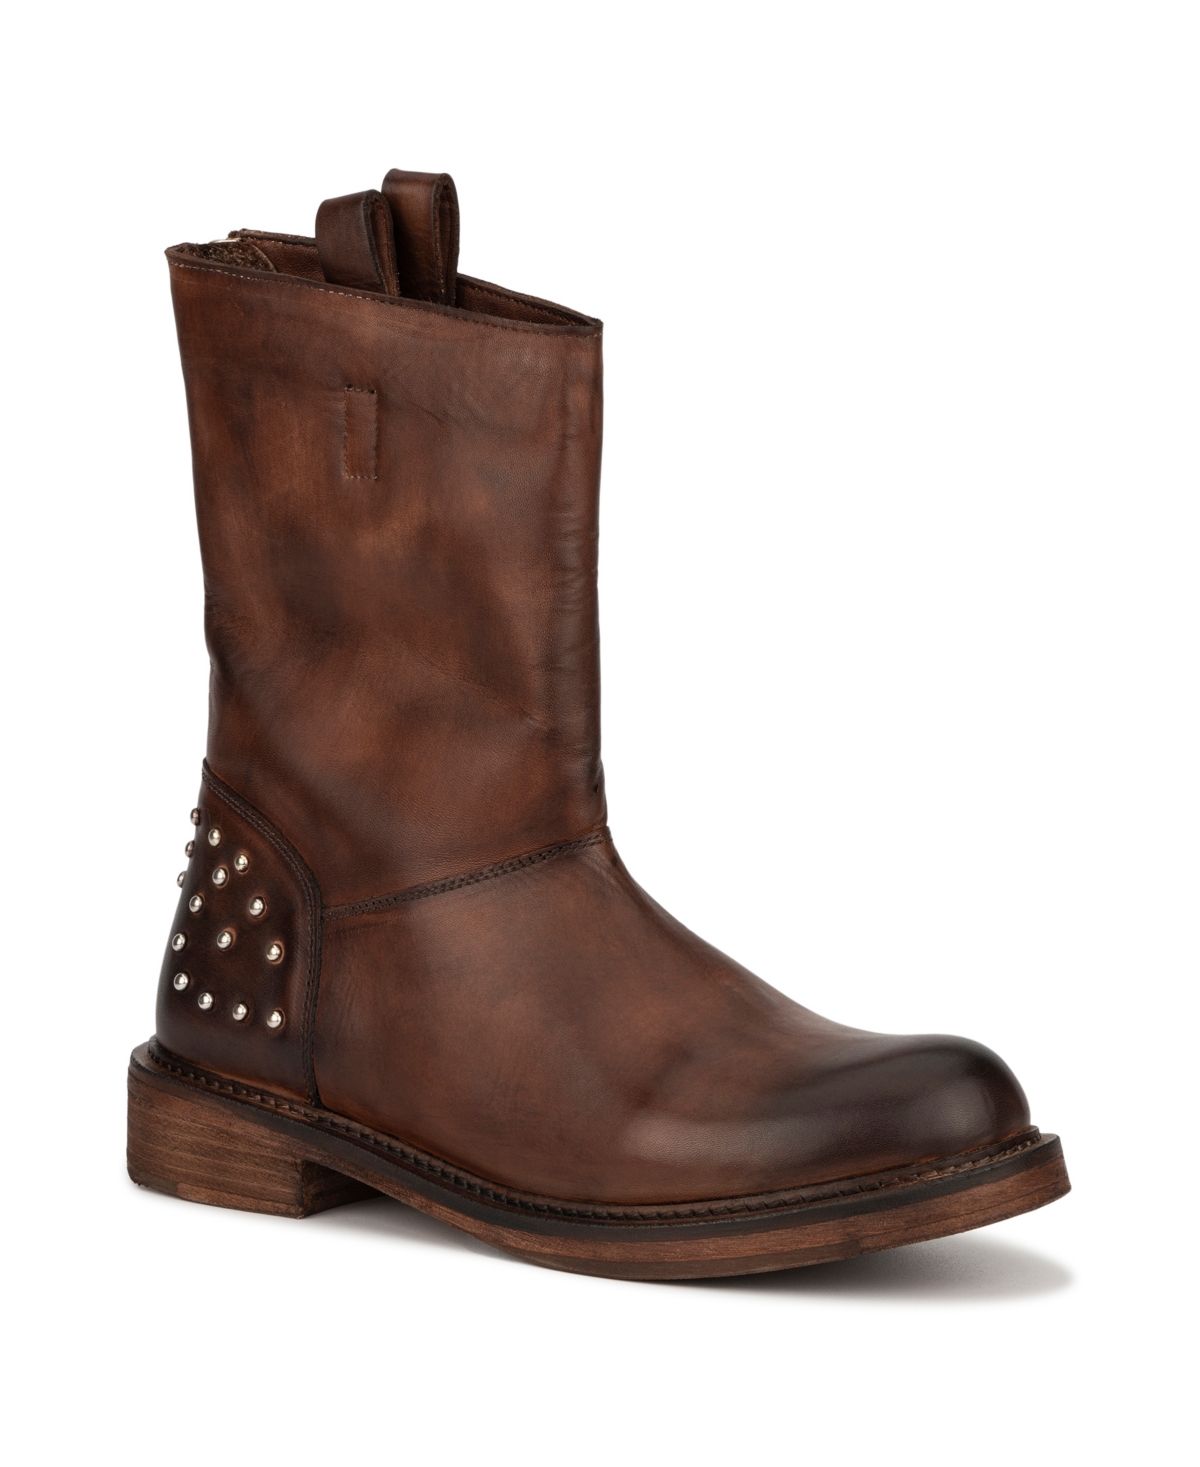 Vintage Foundry Co Women's Stacy Boot - Brown